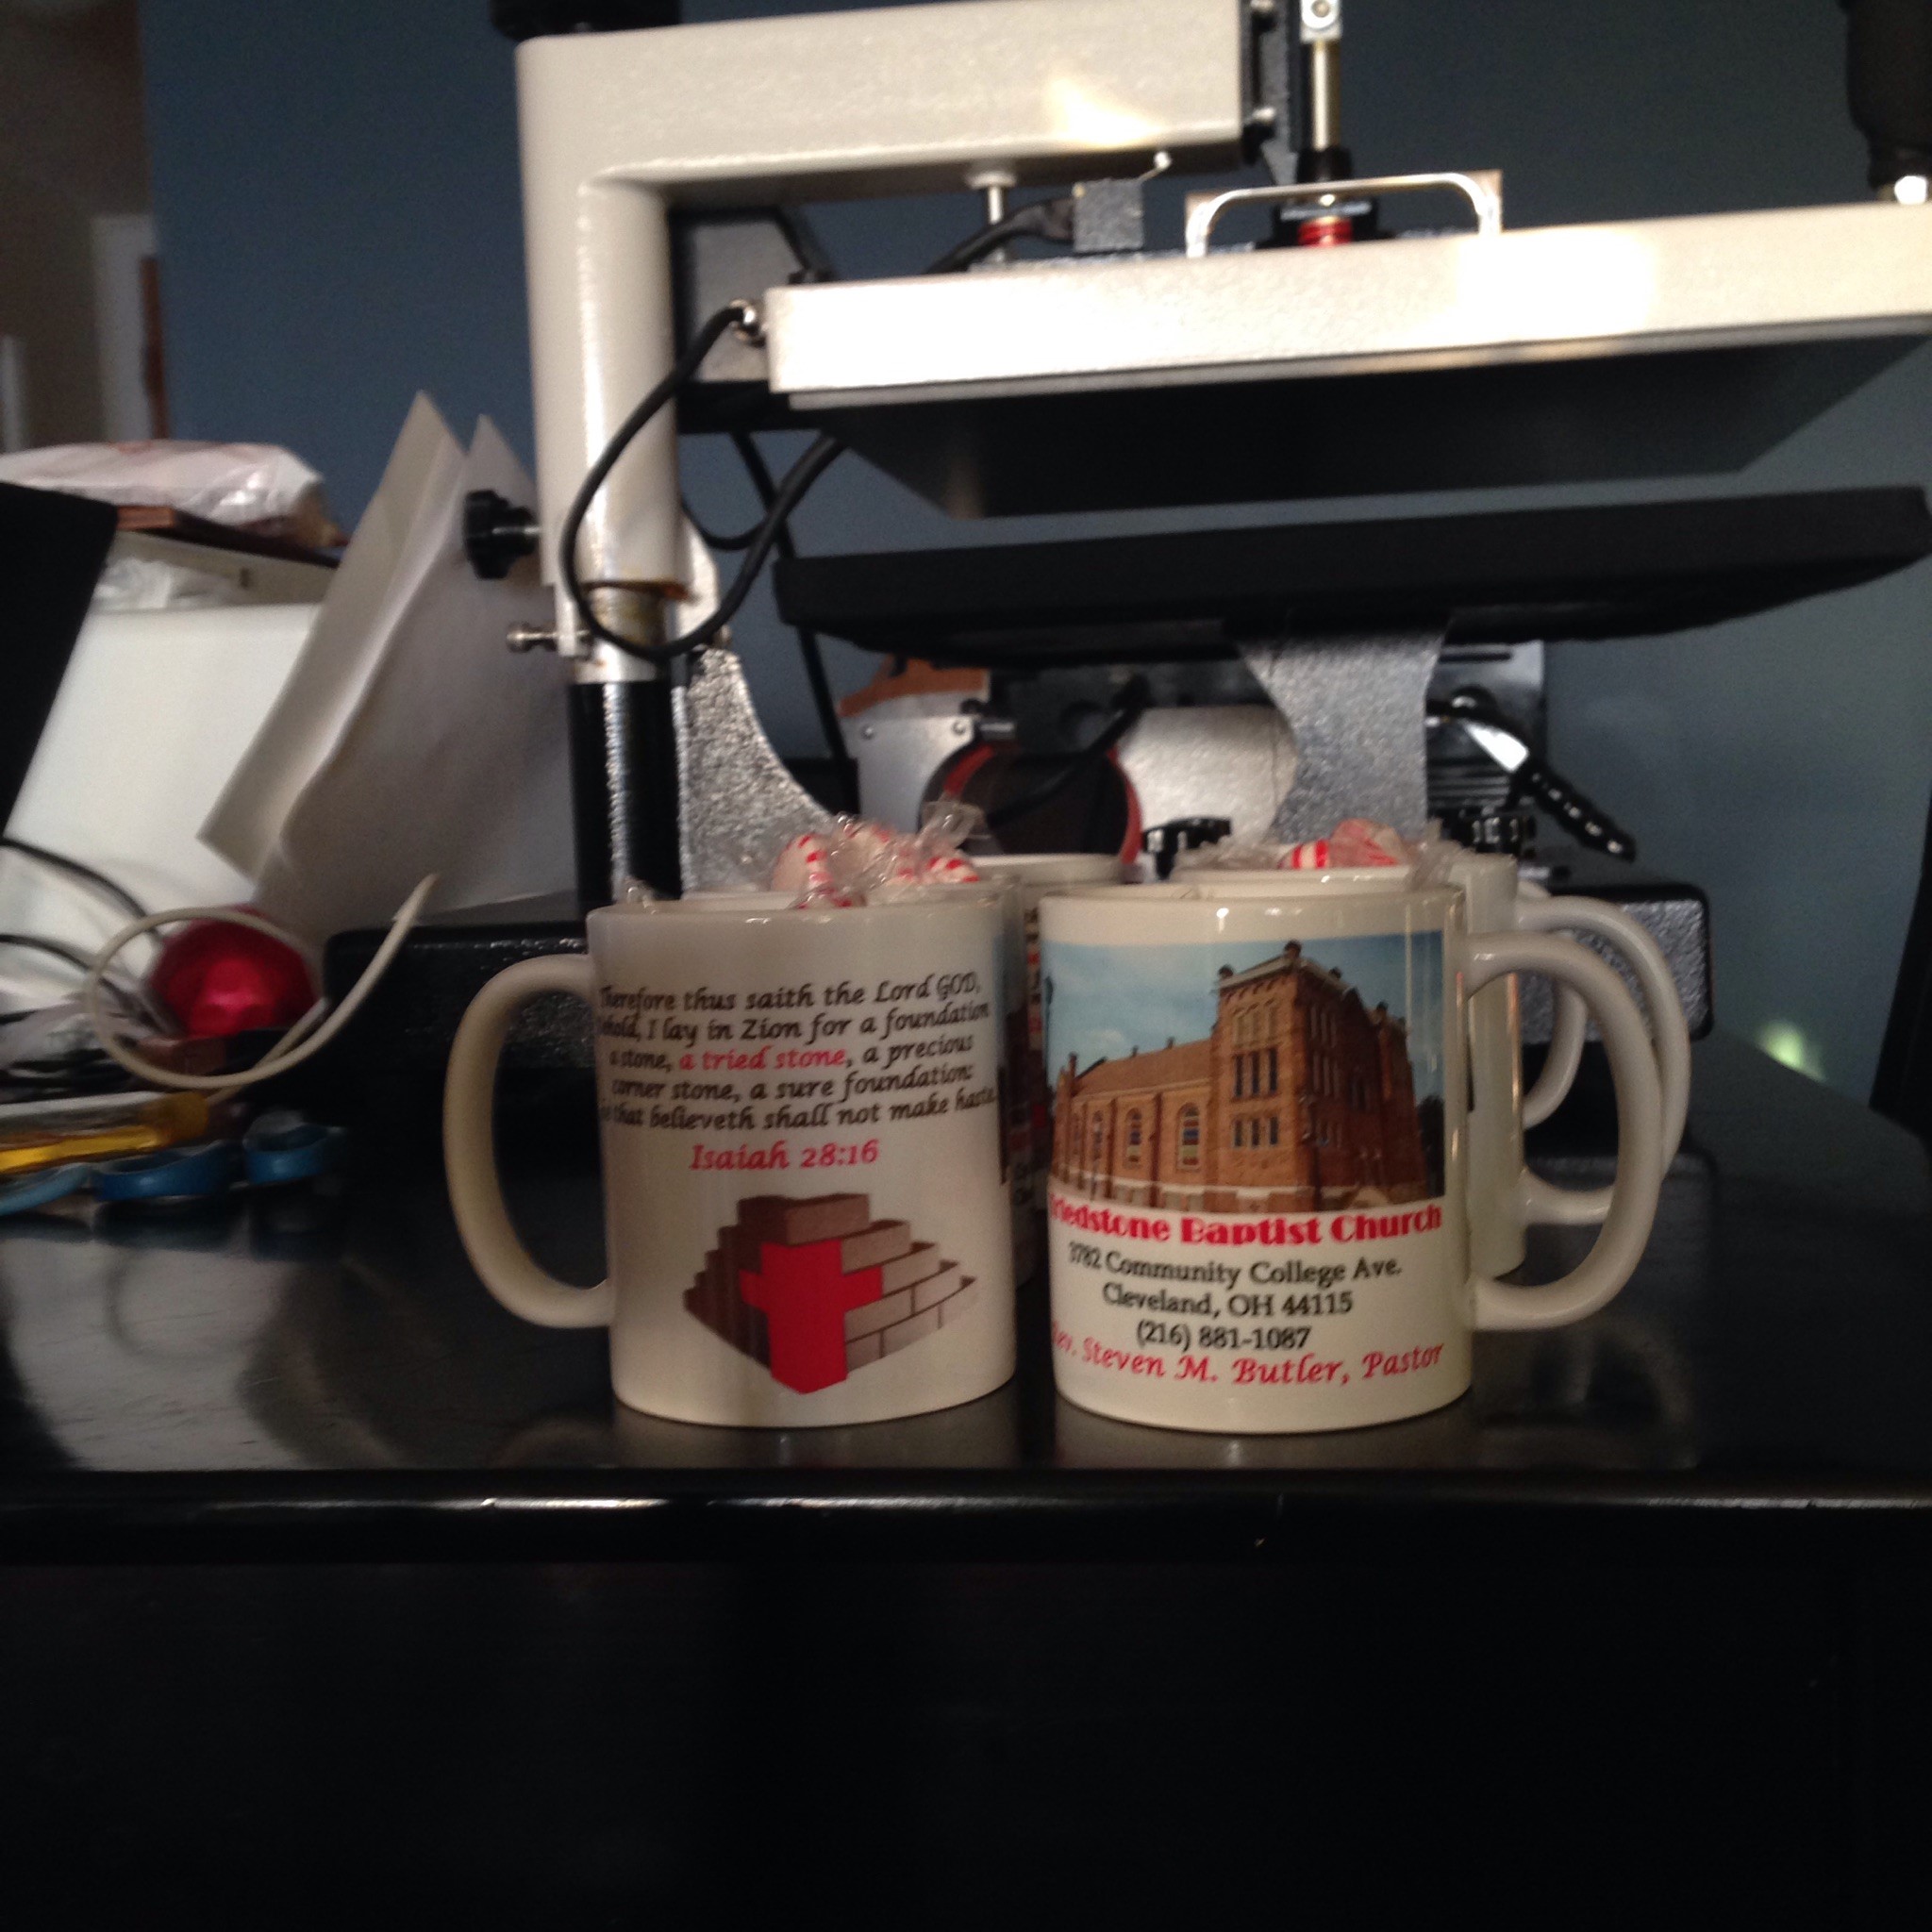 Church Fundraiser Mugs made with sublimation printing